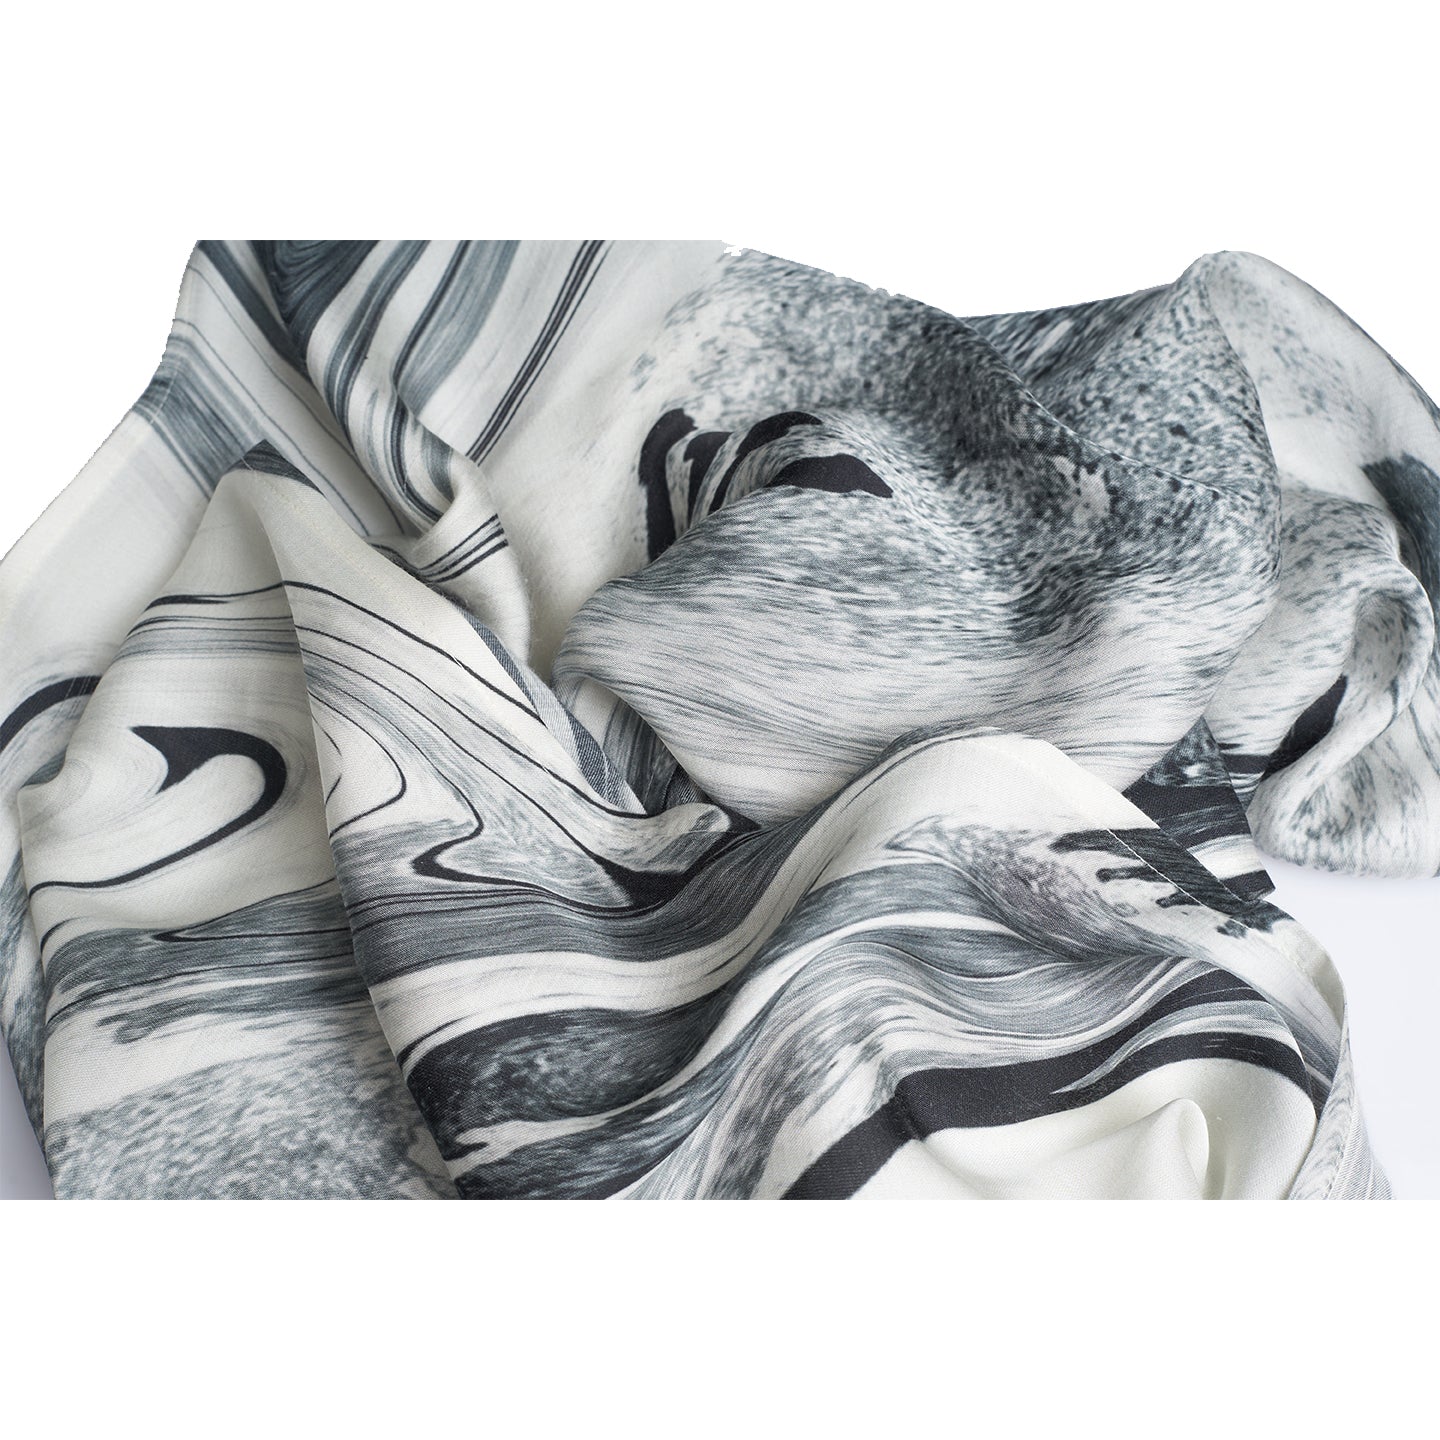 A close up photo of black and white thin printed scarf made from organic rose petal fabric, printed with non toxic GOTS certified inks. this print is inspired from antique black and white photographers of fields and paints